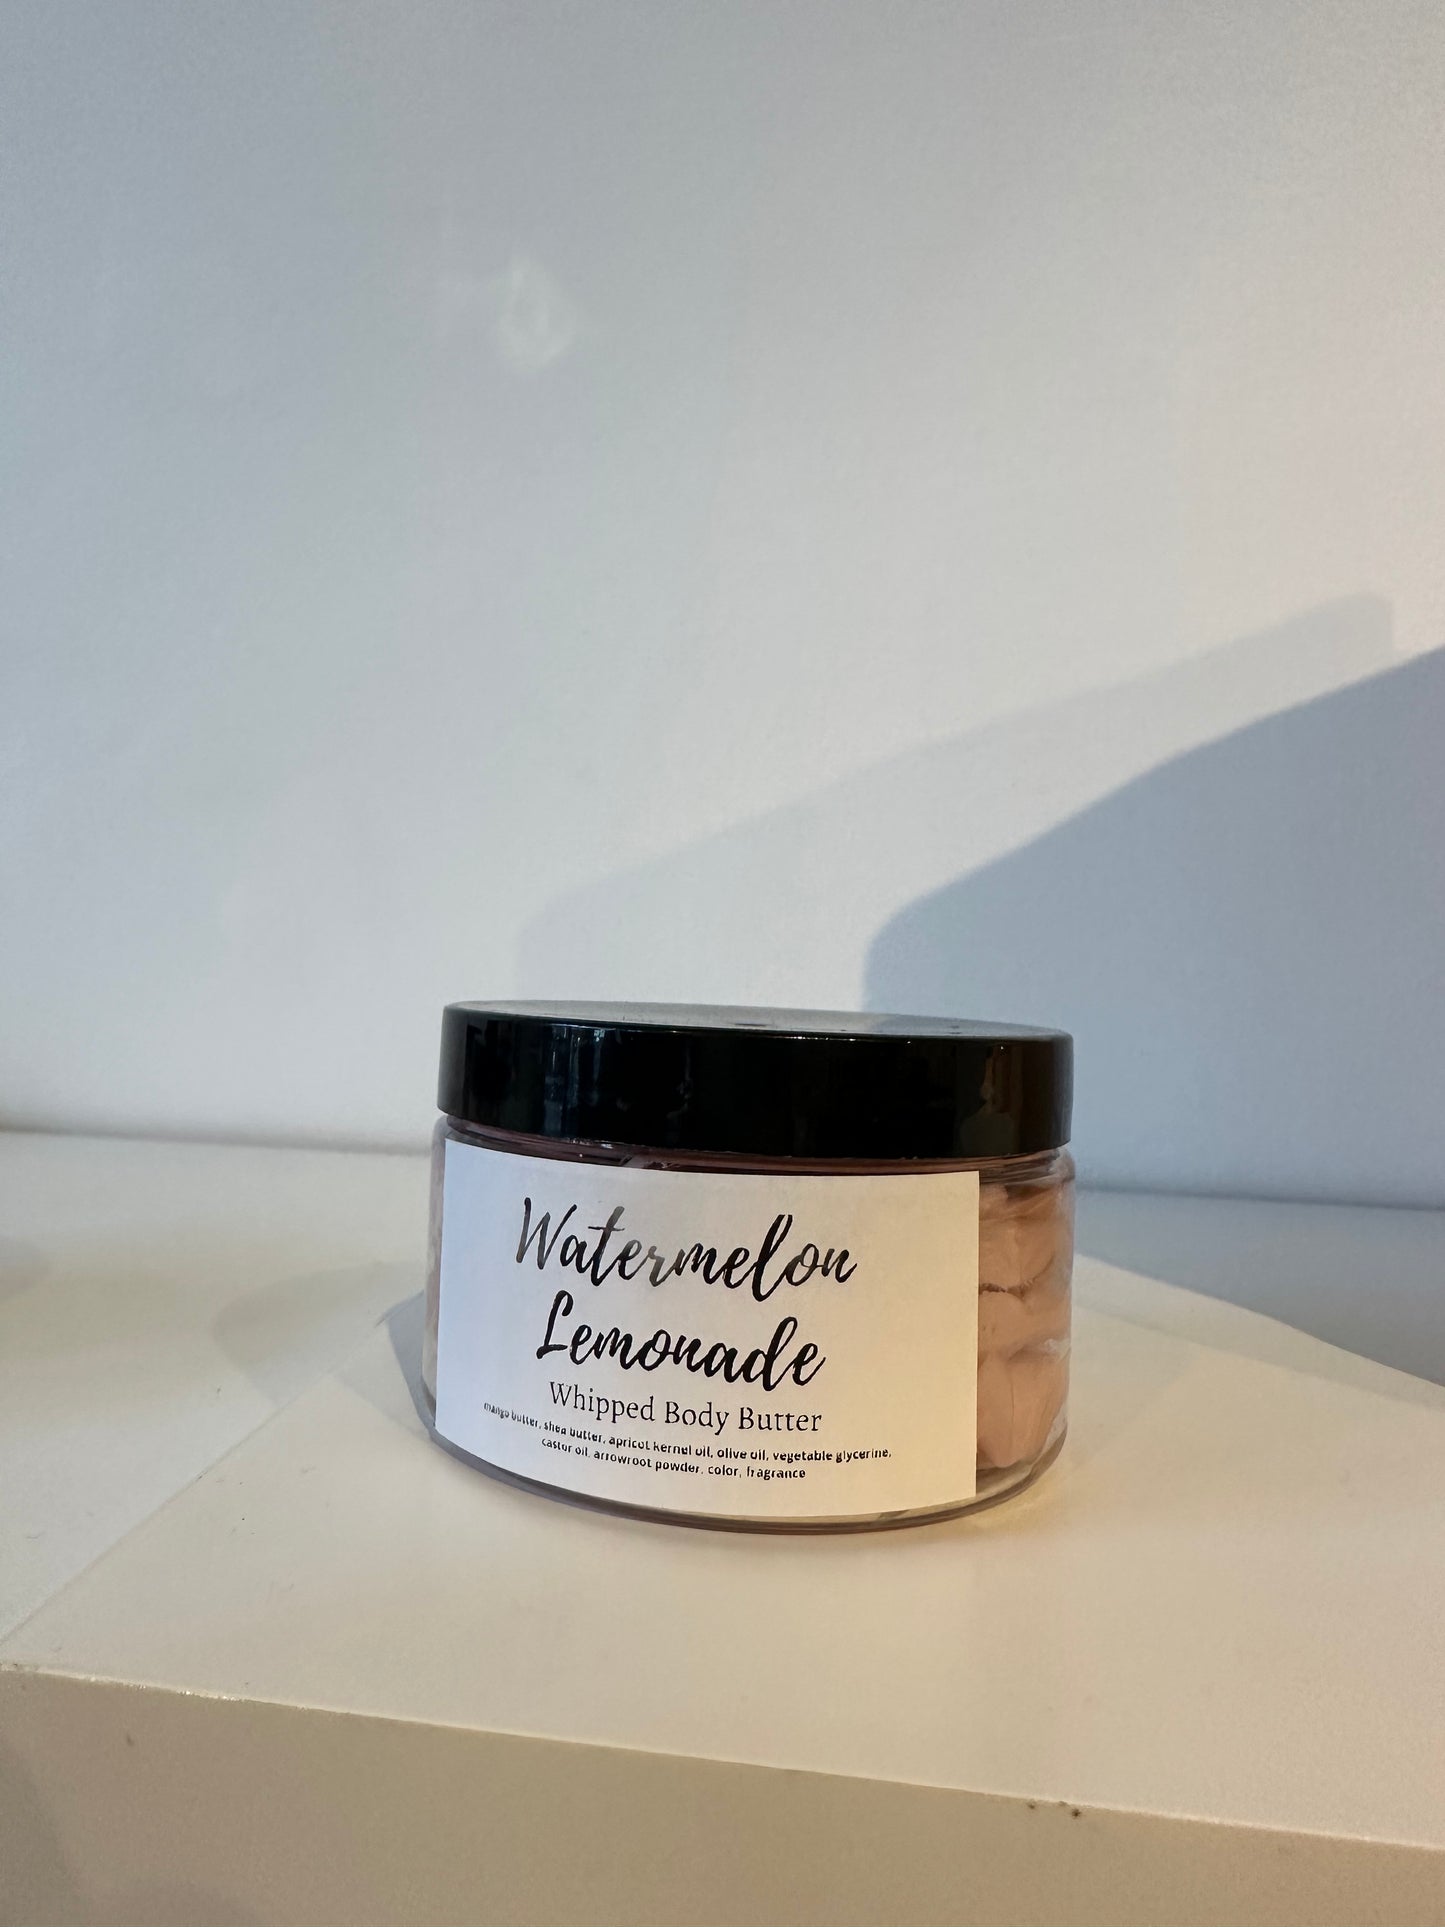 Whipped body butter by Glammed By Dainty